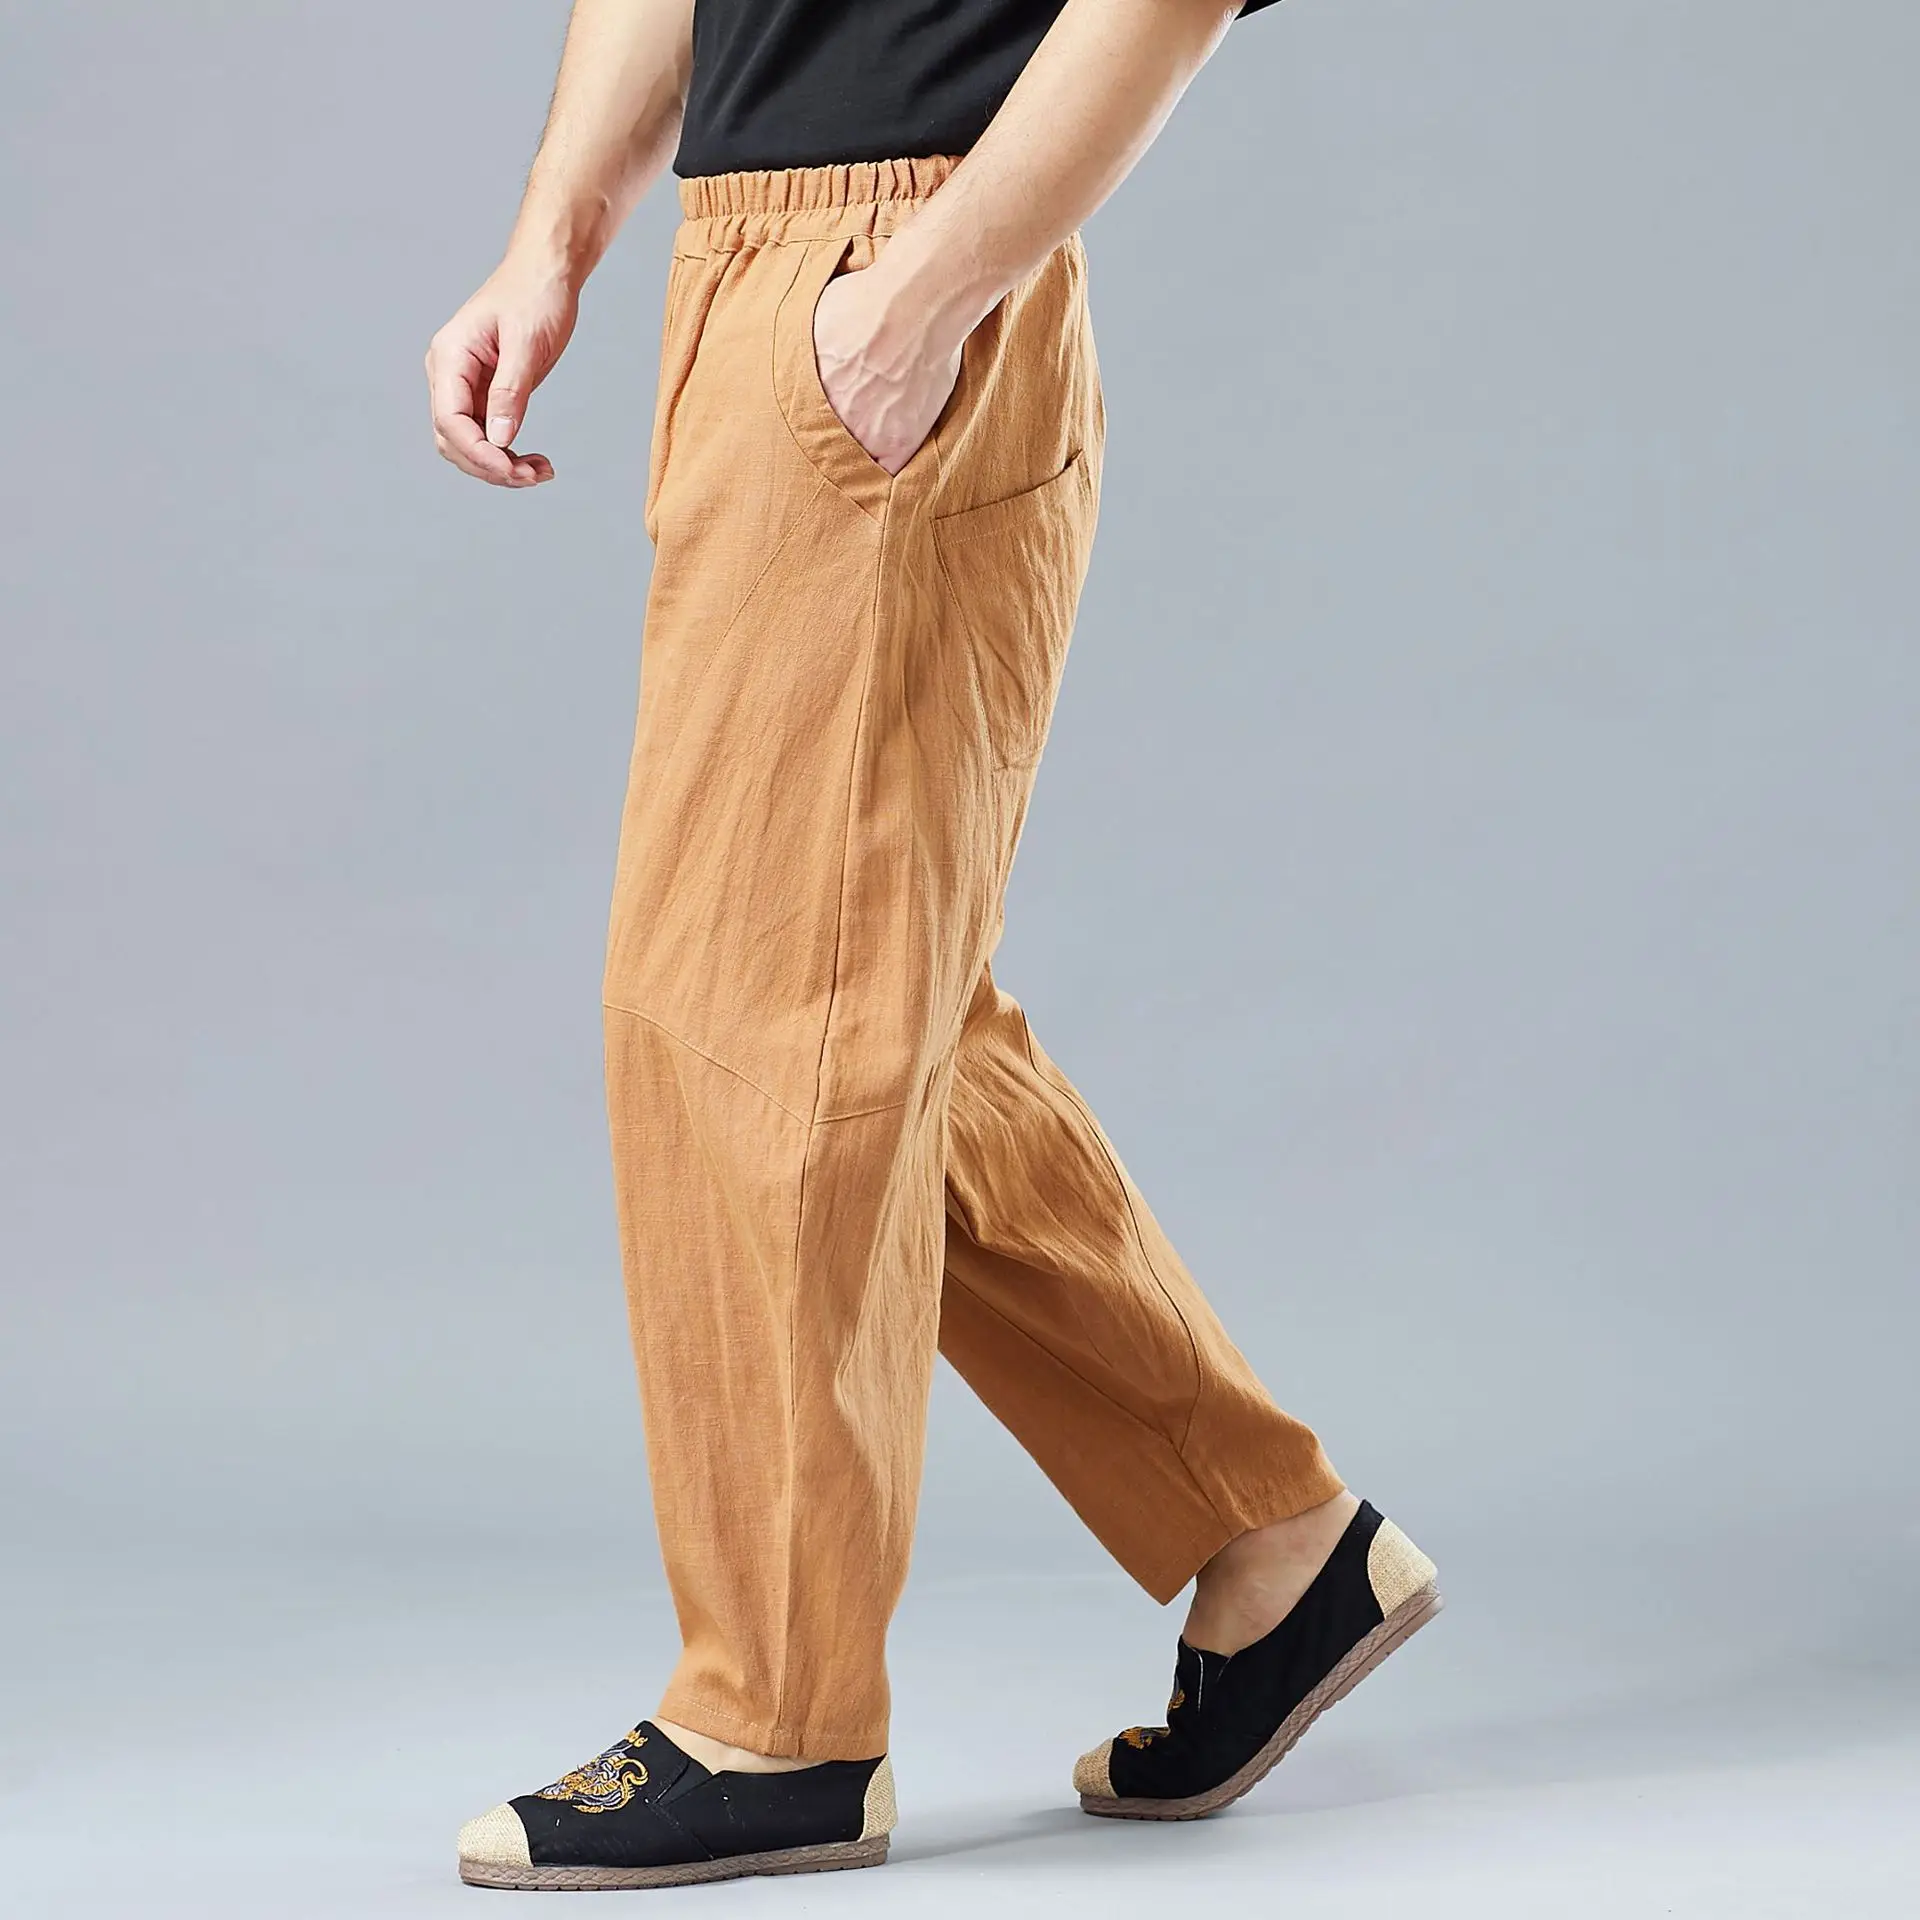 Top more than 251 chinese style trousers best